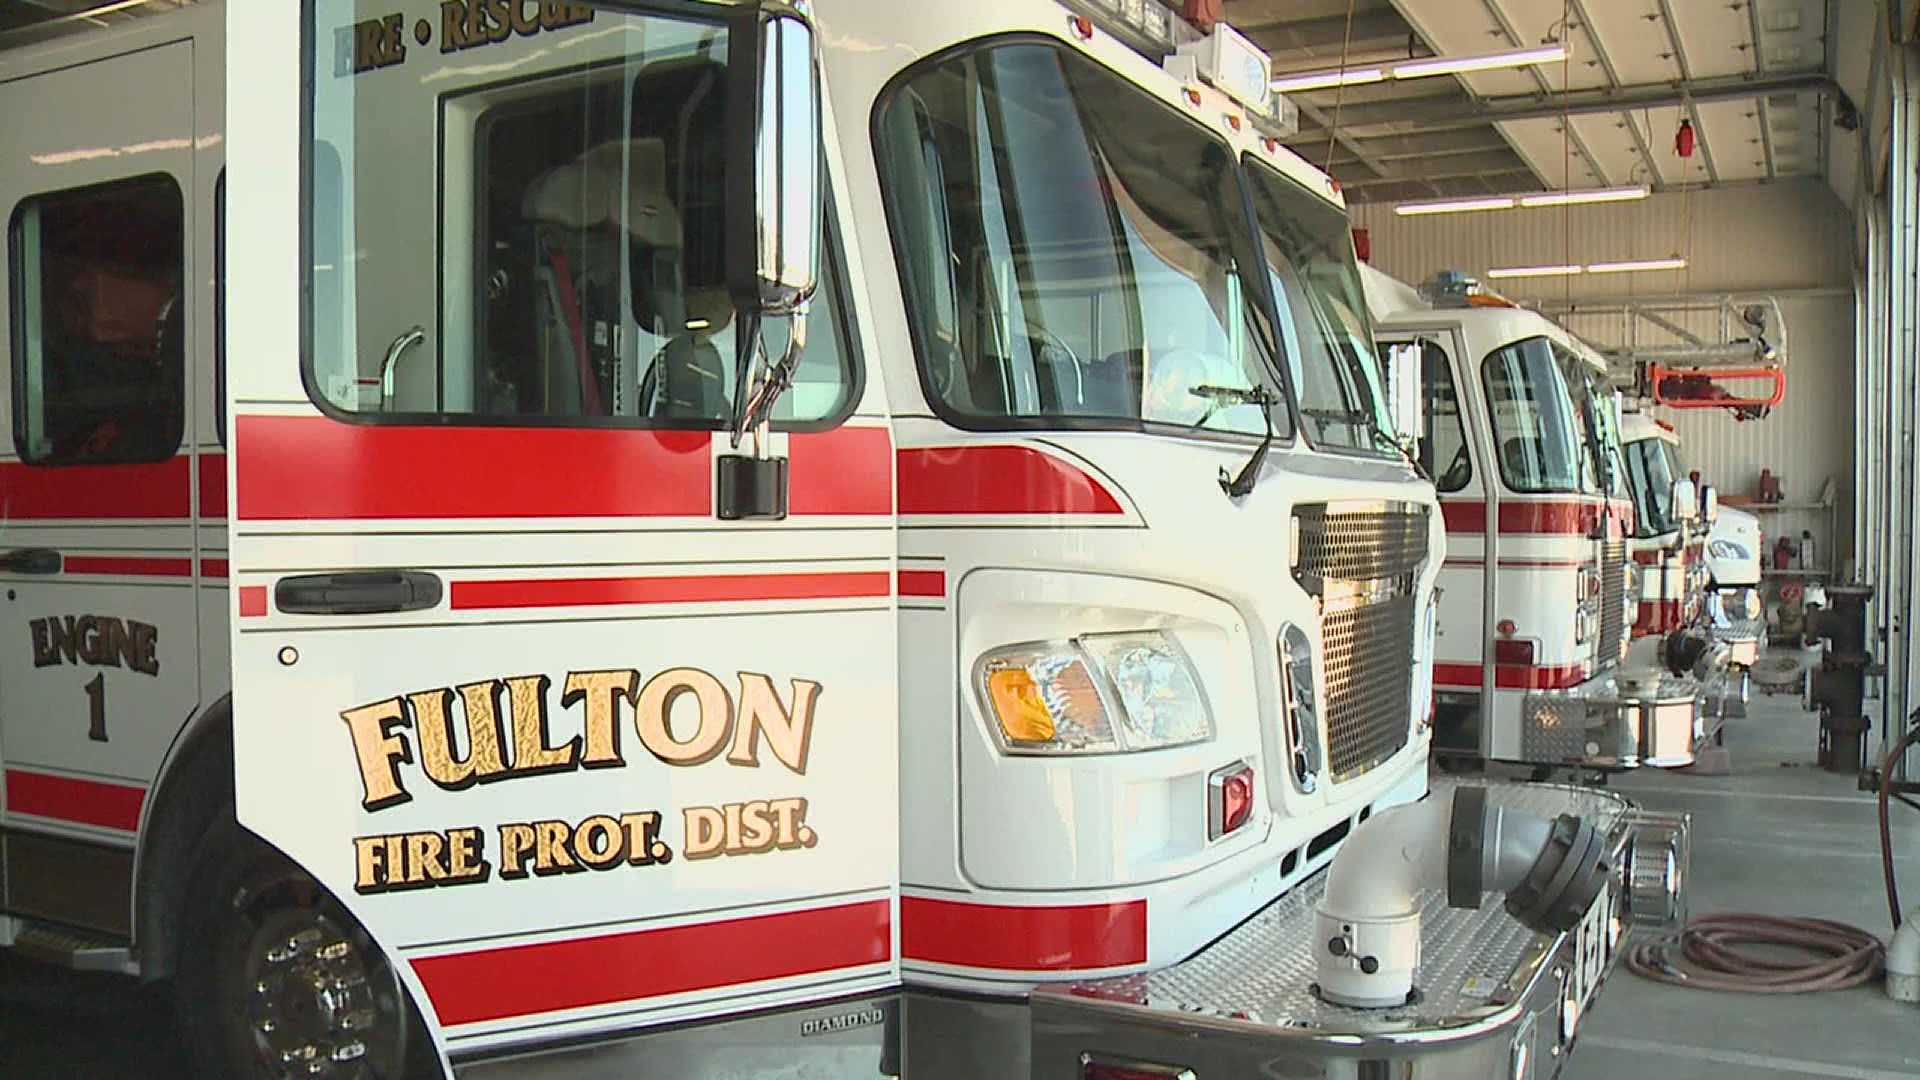 Two Fulton firemen were sent for an overnight shift Monday